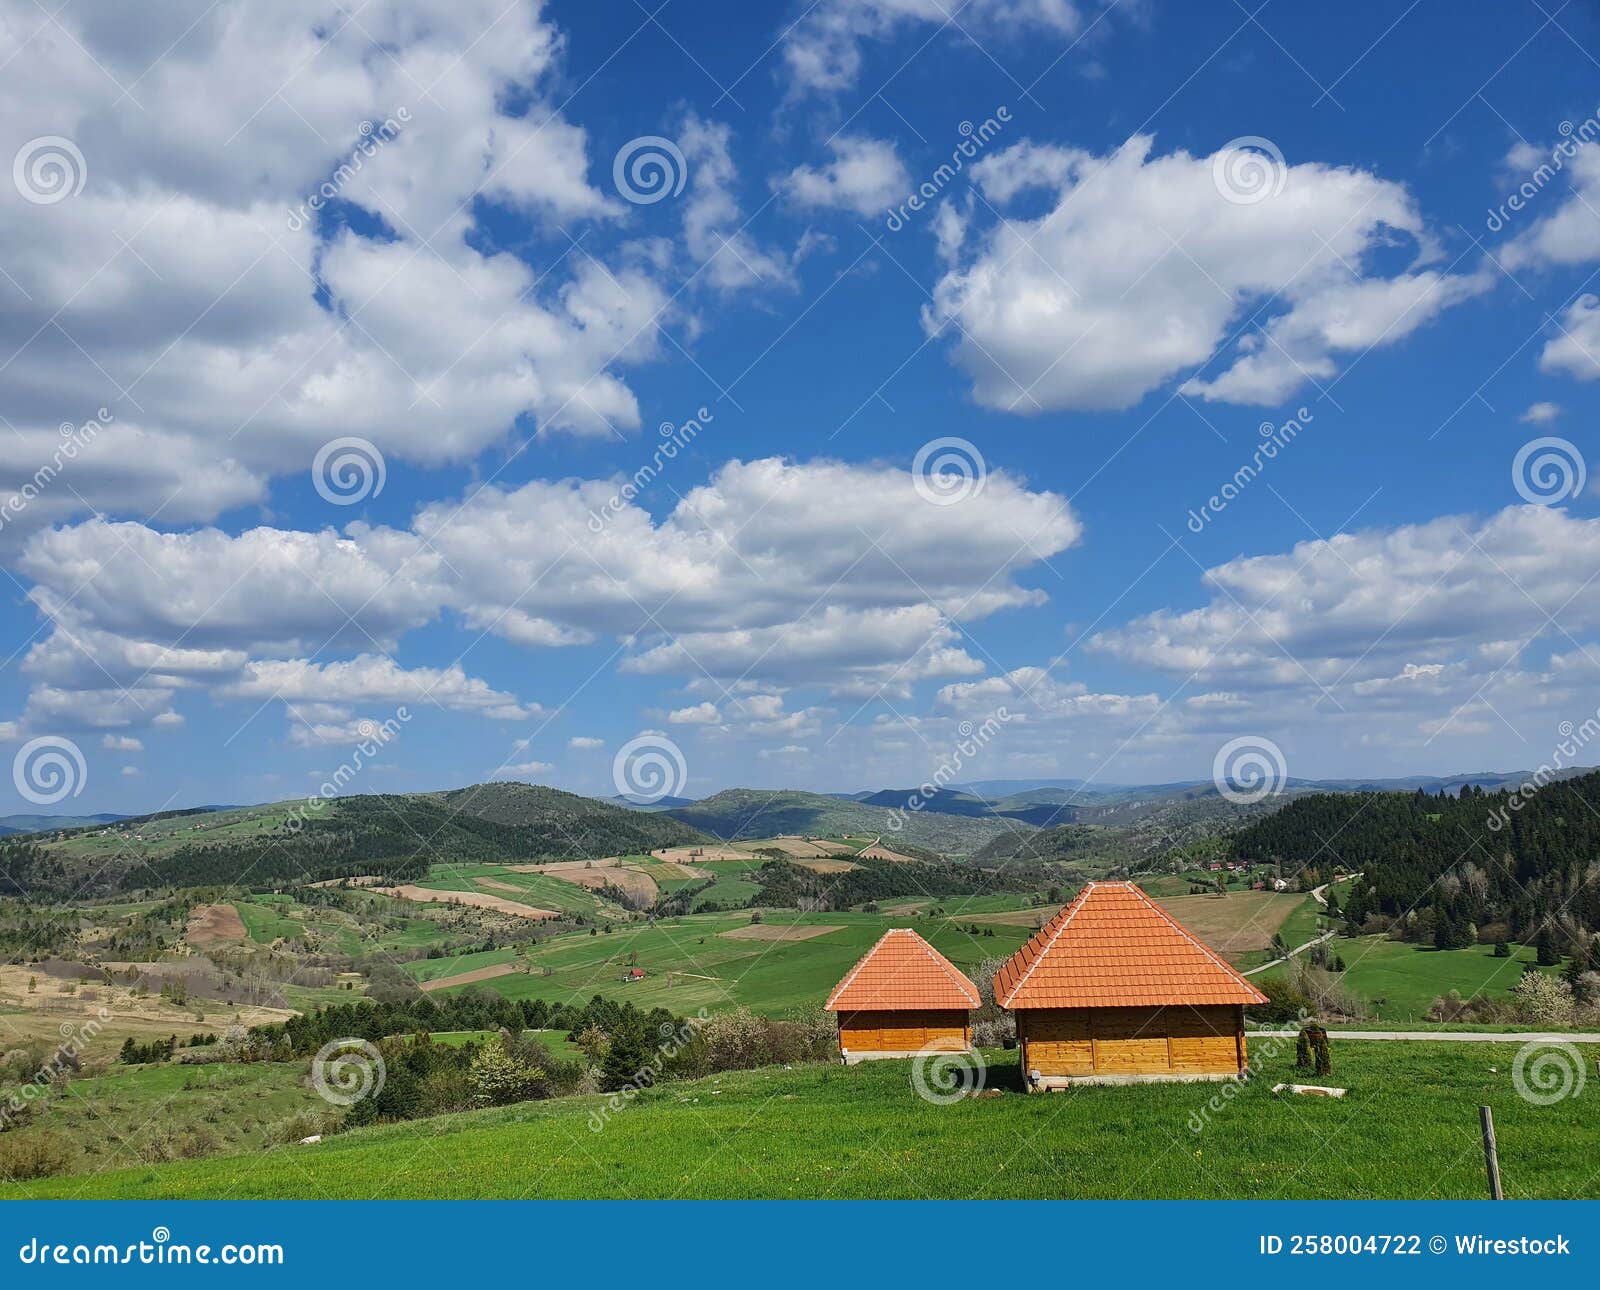 orange alcoves in the meadow with mountains and green meadow in the background